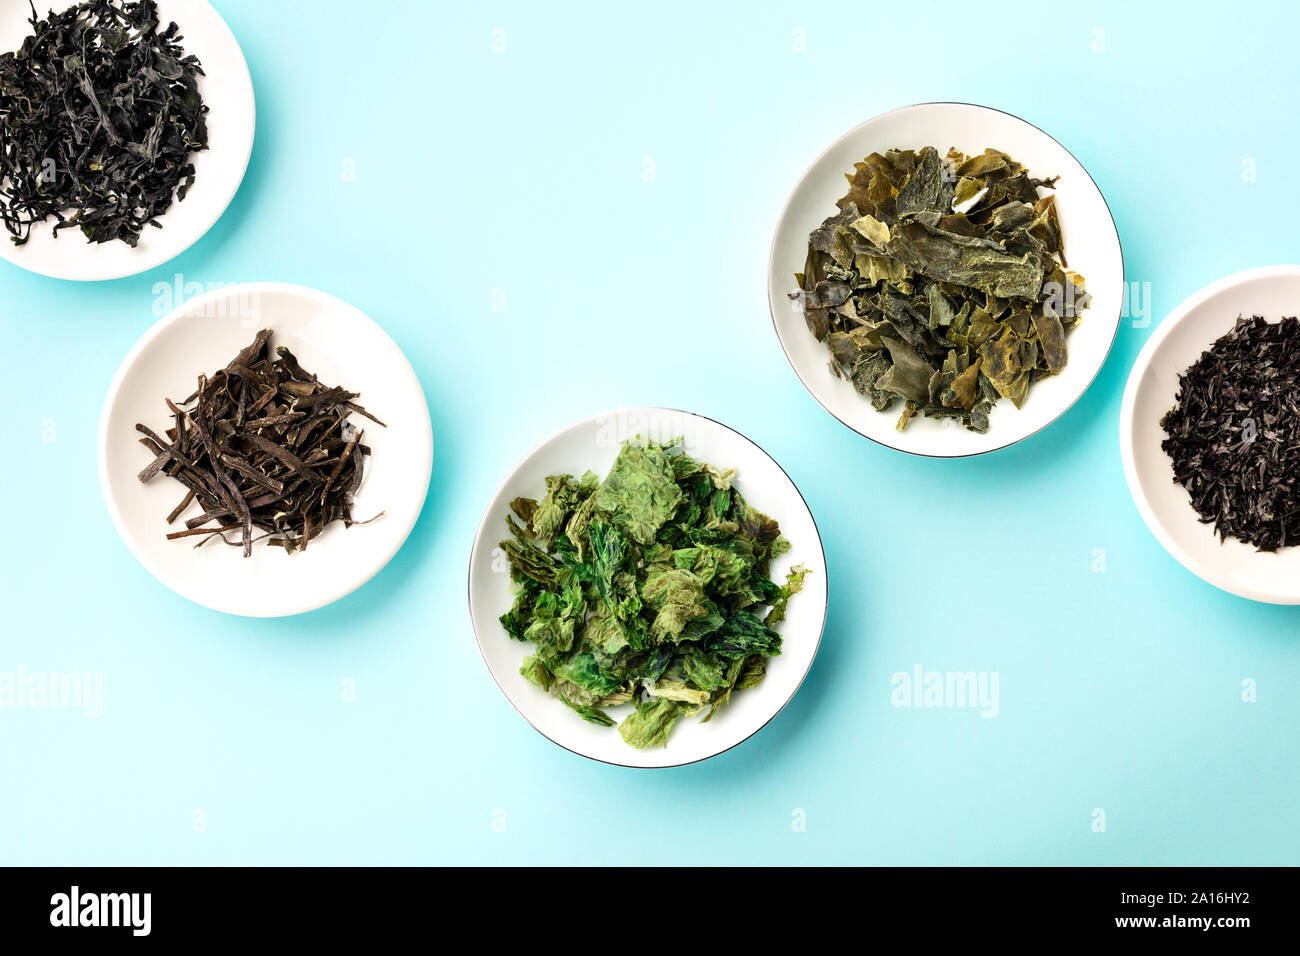 Various dry seaweed, sea vegetables, shot from above on a teal blue background with copy space Stock Photo